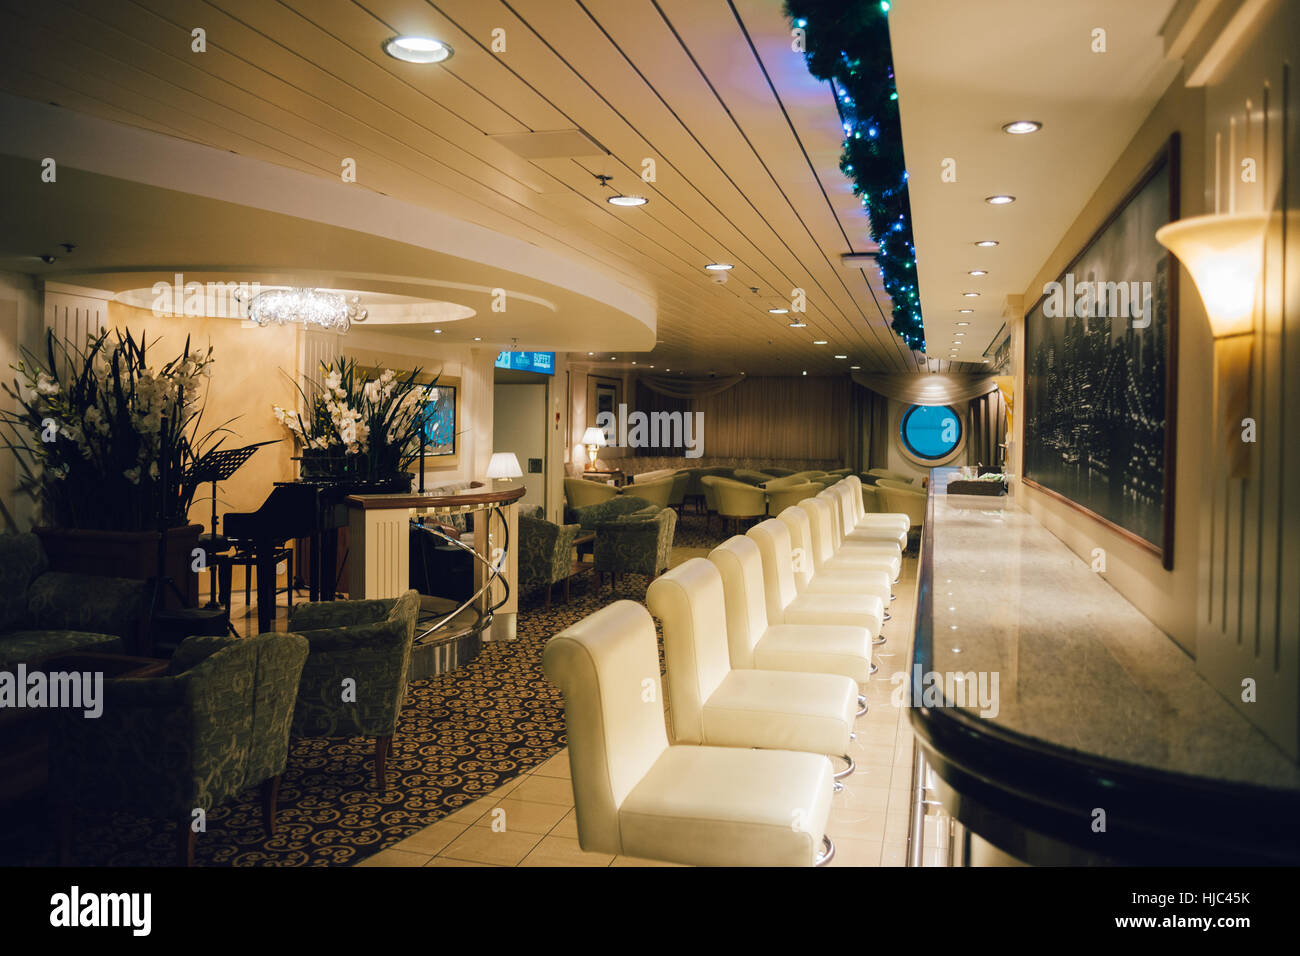 STOCKHOLM, SWEDEN - JAN 12, 2017: Interior of the piano bar Manhattan at the Baltic Queen cruise ferry operated by Tallink, one of the largest shippin Stock Photo